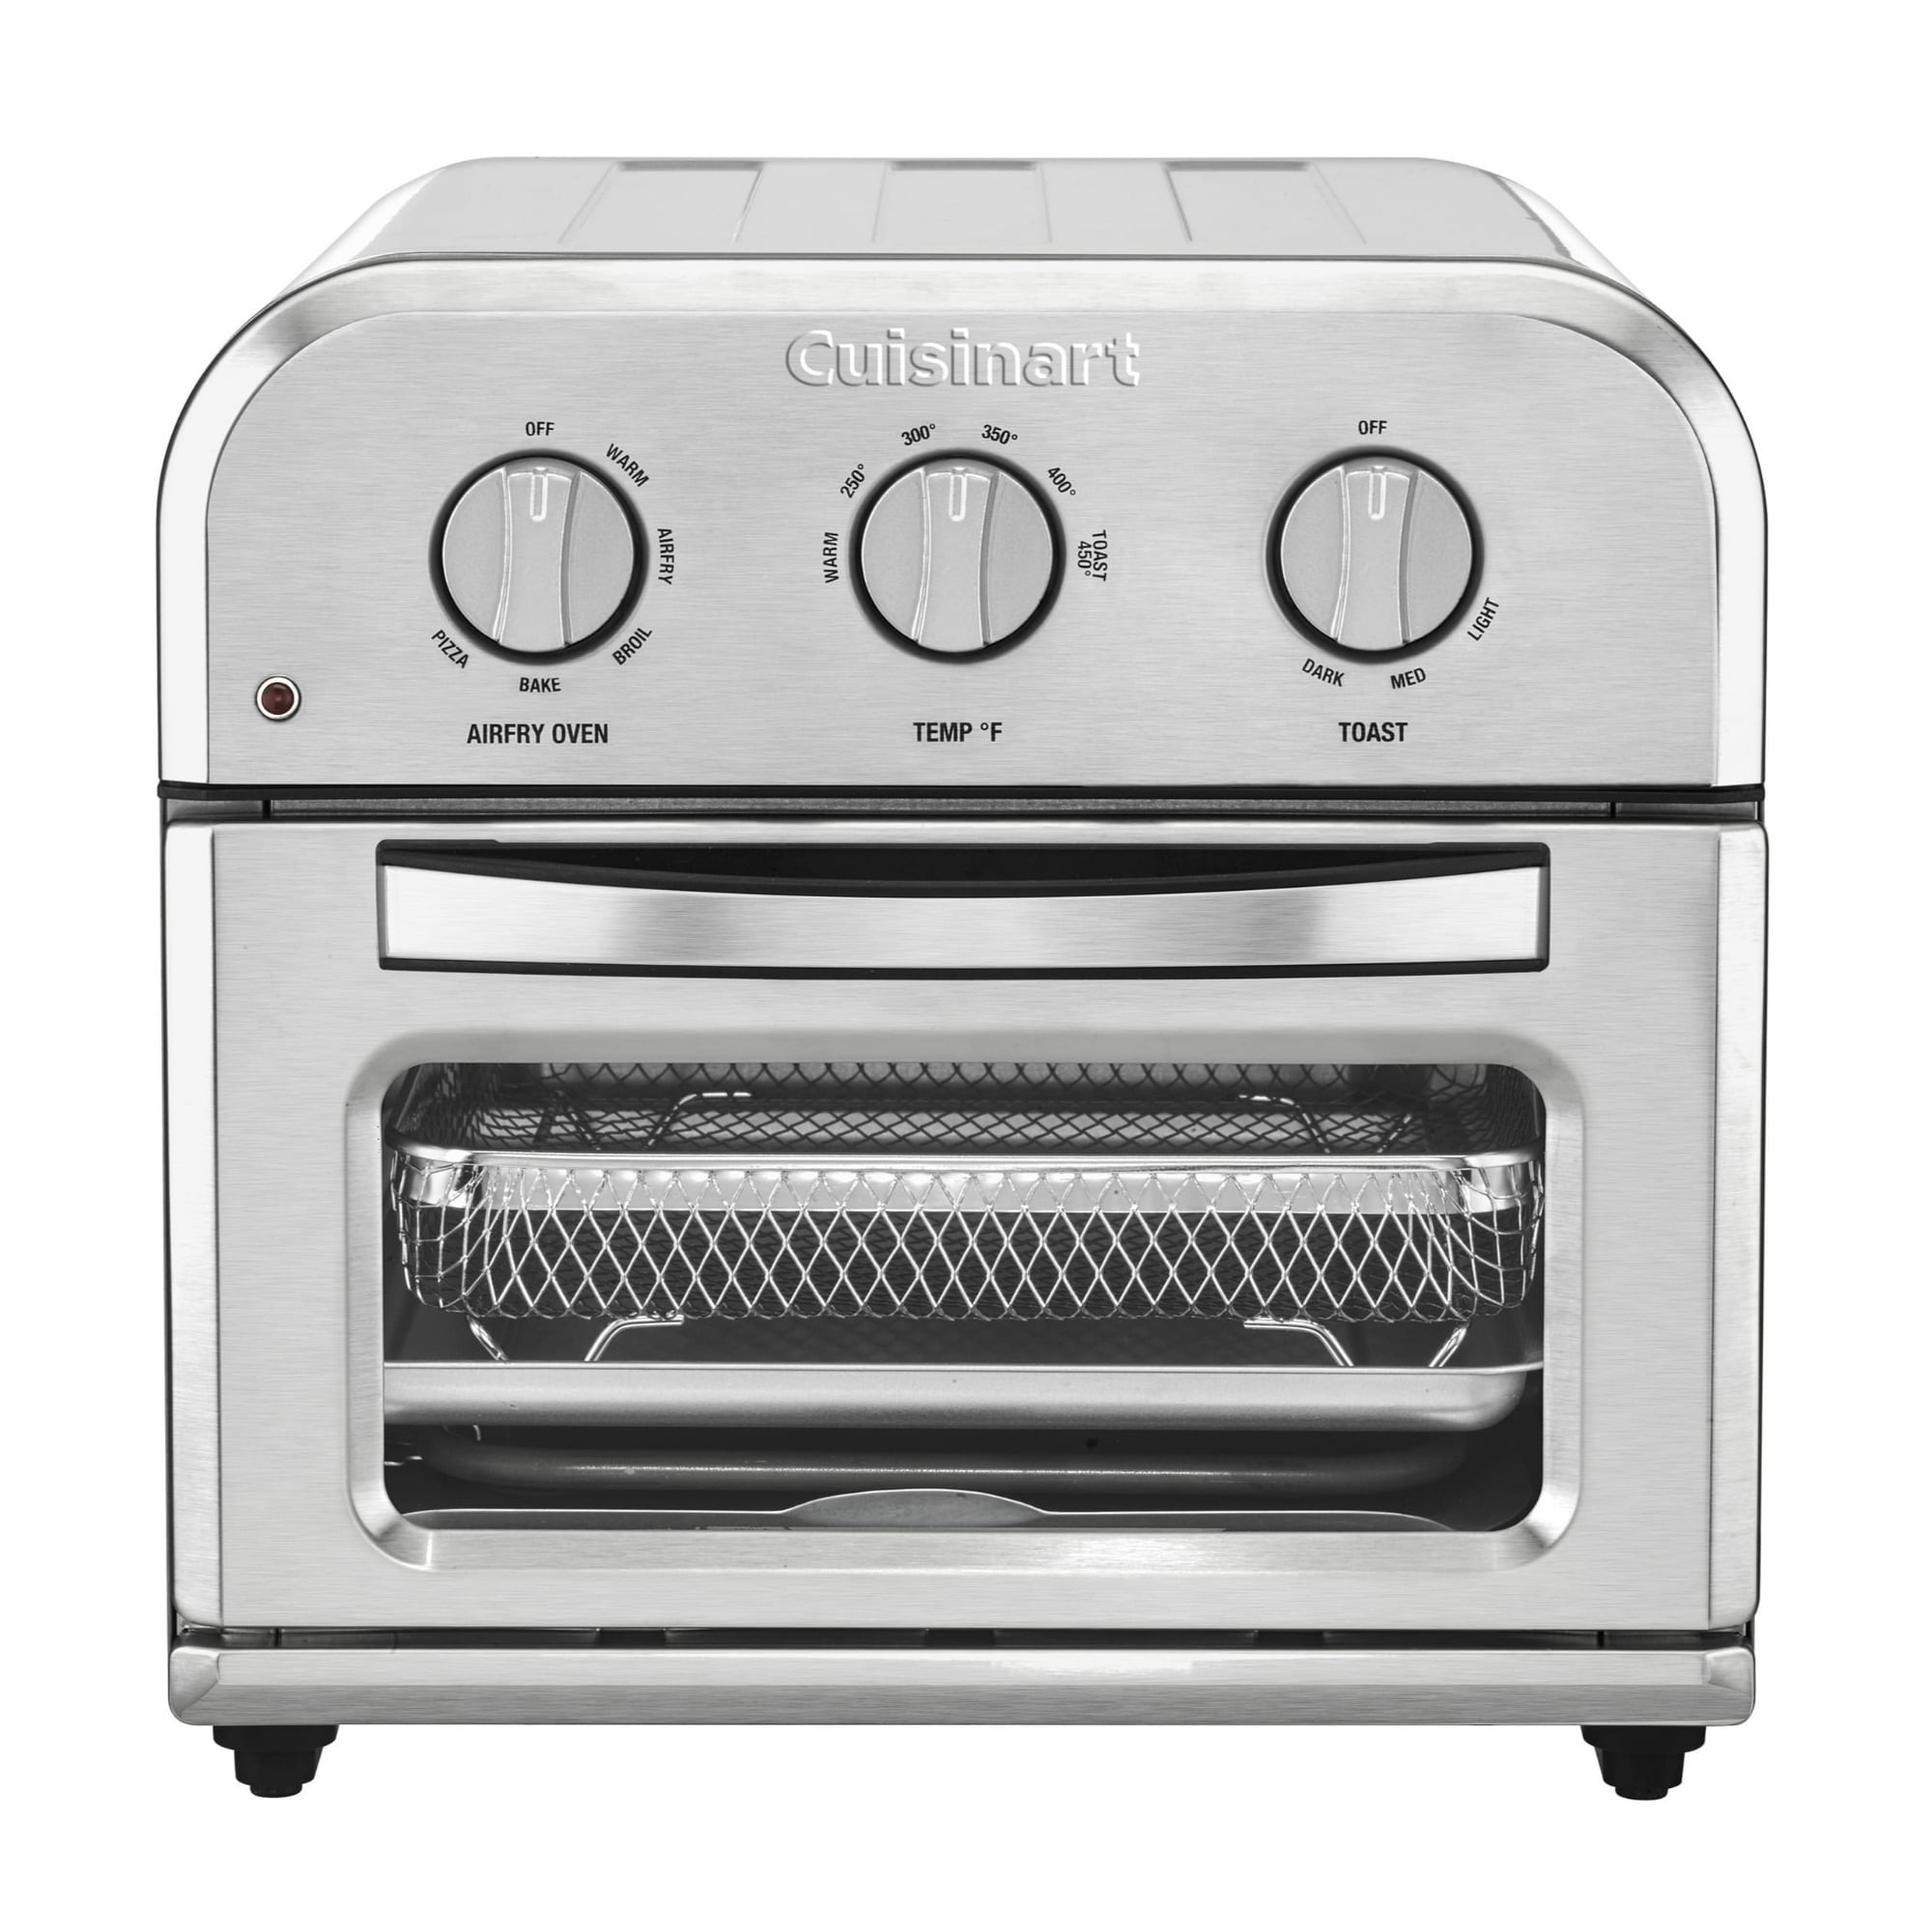 Stainless Steel Air Fryer Toaster Oven w/ Thermostat Cuisinart 1800W 0.6 Cu.Ft 